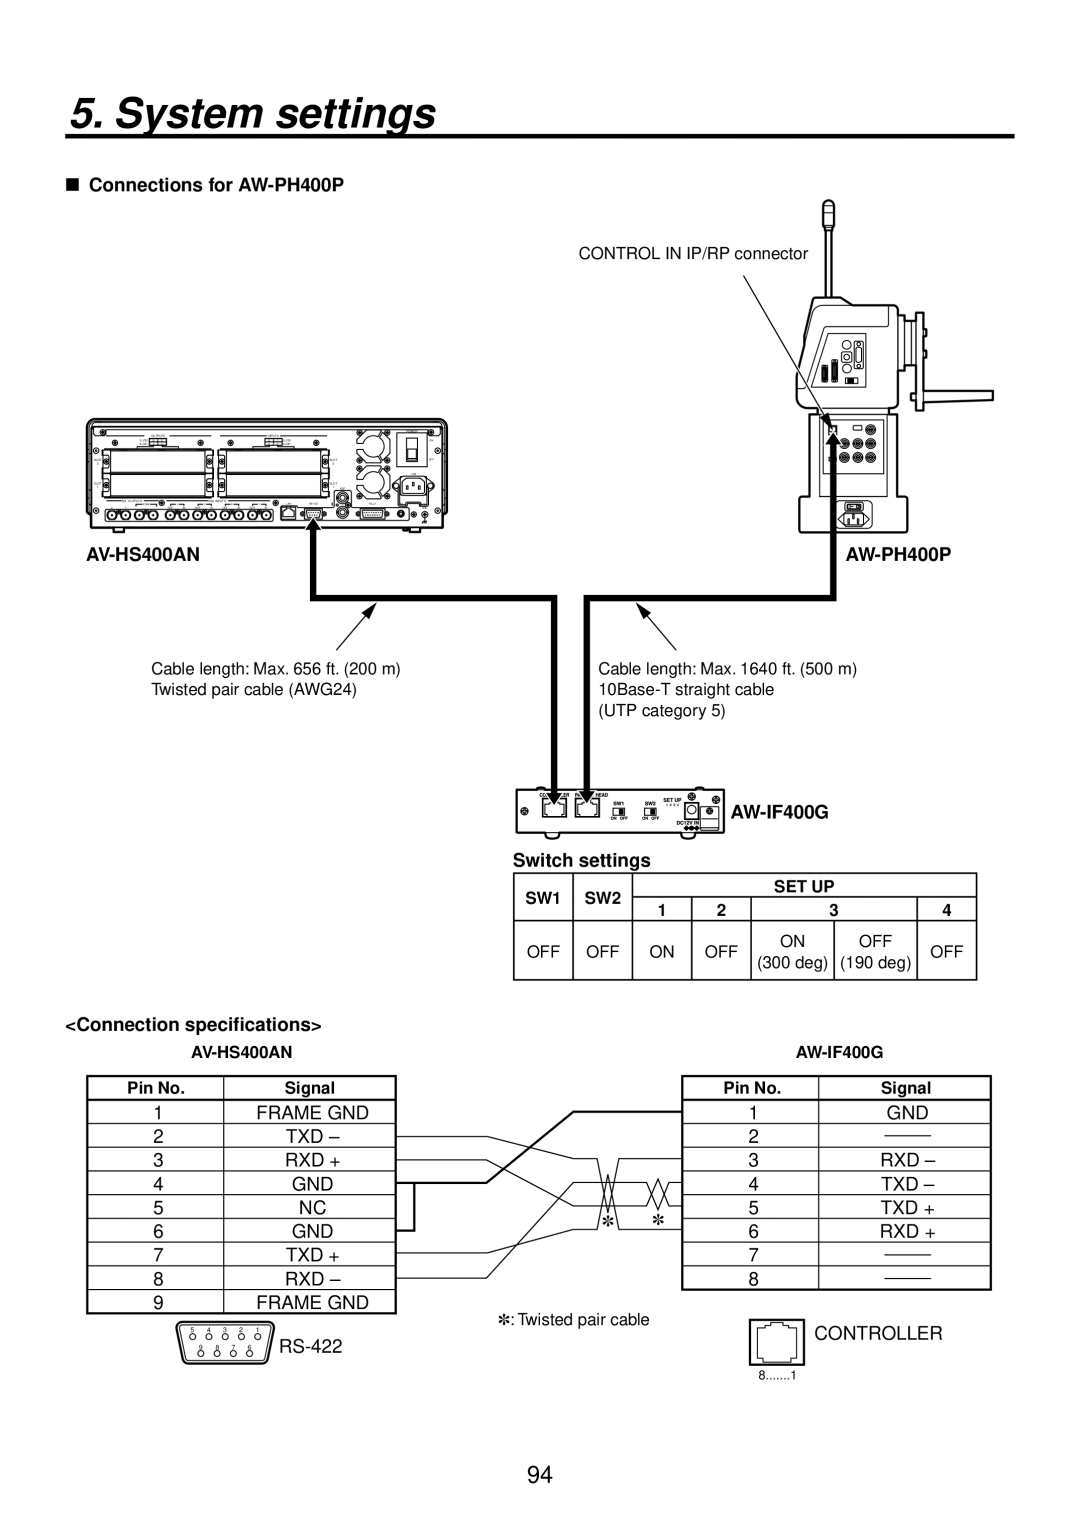 Panasonic AV-HS400AN System settings,  Connections for AW-PH400P, AW-IF400G Switch settings, Connection specifications 